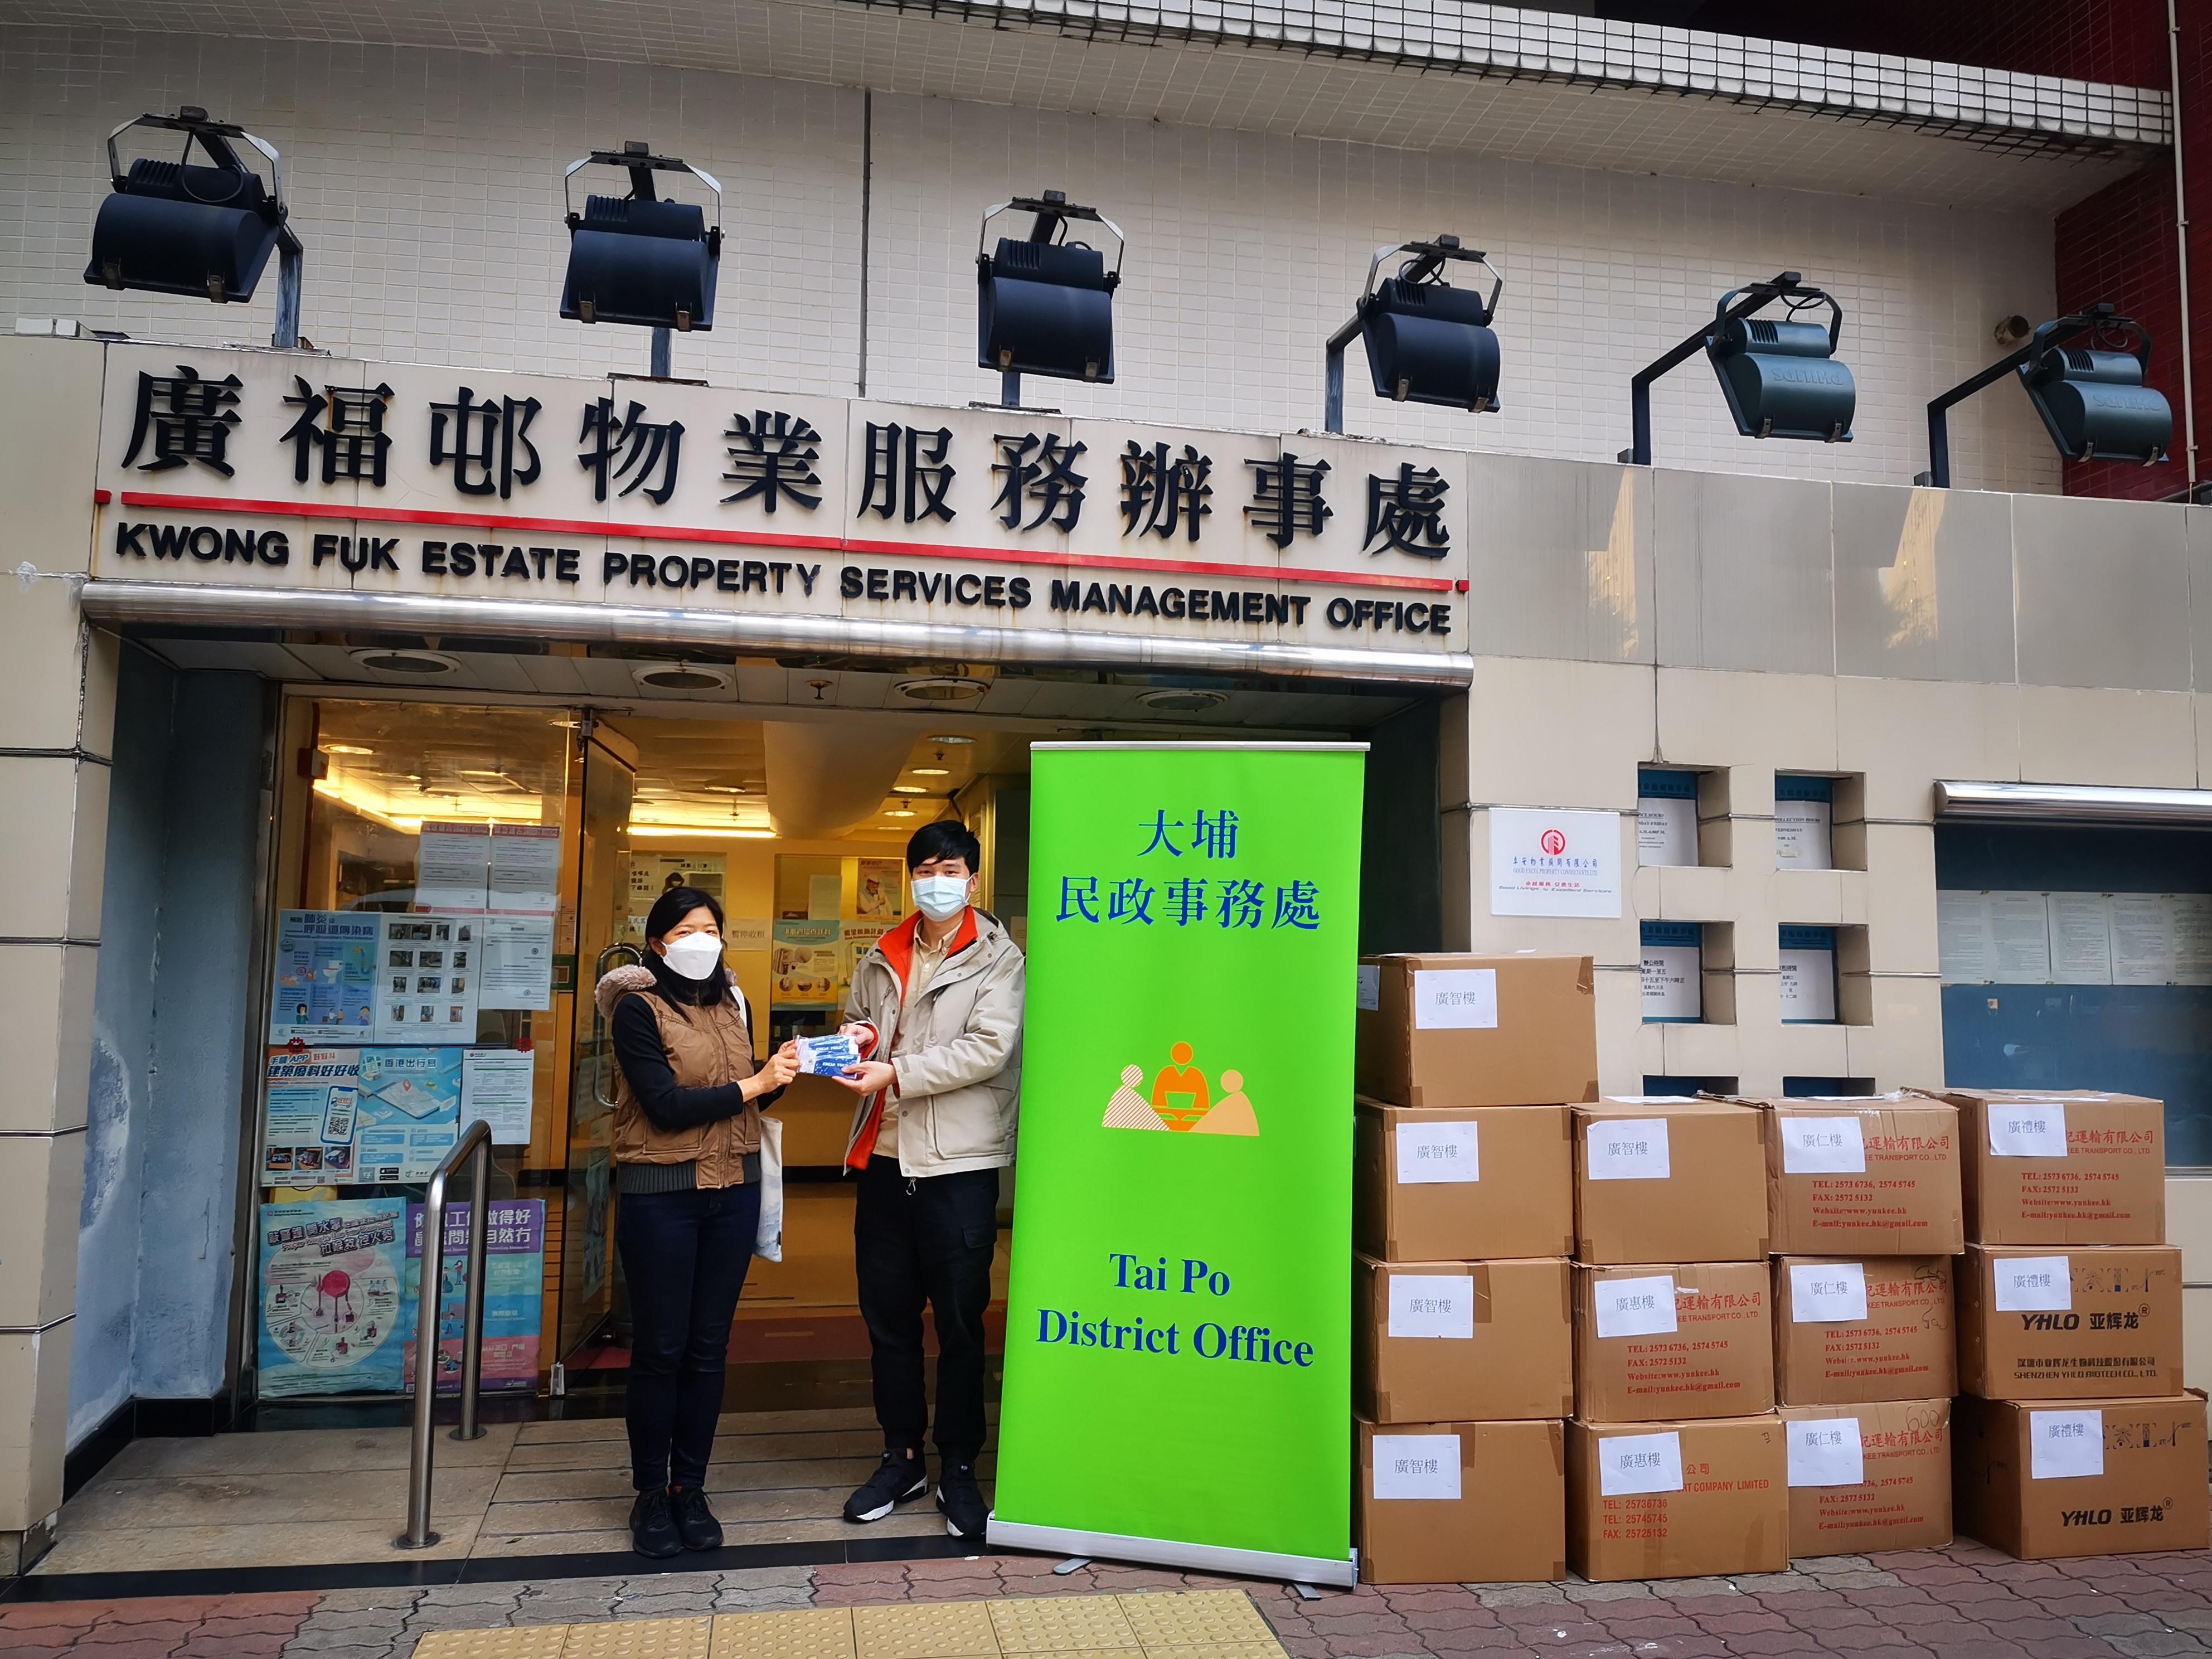 The Tai Po District Office today (February 25) distributed rapid test kits to households, cleansing workers and property management staff living and working in Kwong Fuk Estate for voluntary testing through the property management company.